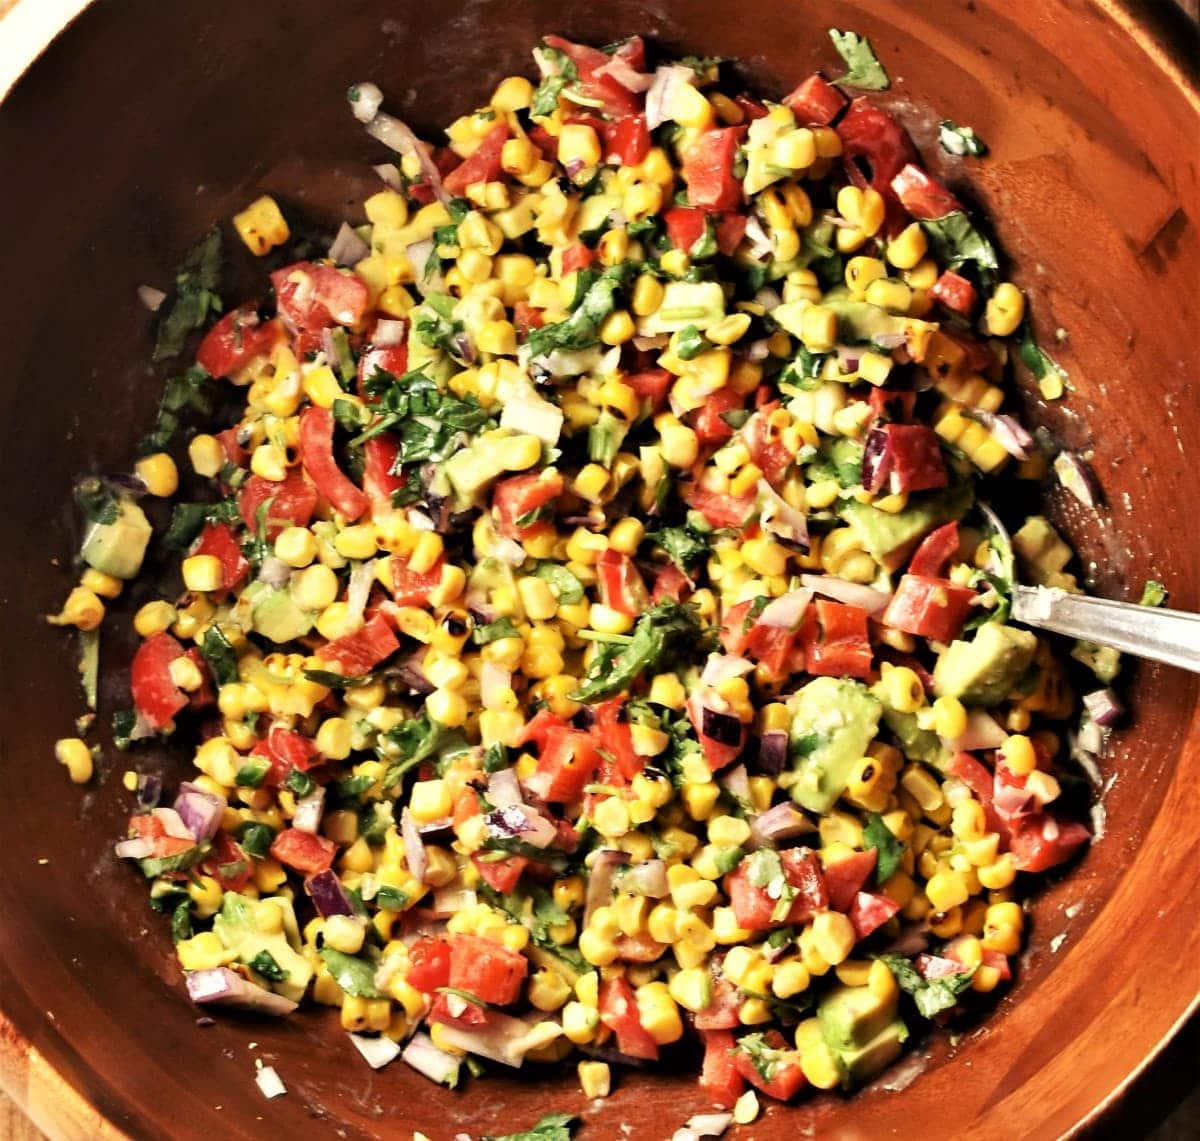 Corn and vegetable salsa in large wooden bowl with spoon.